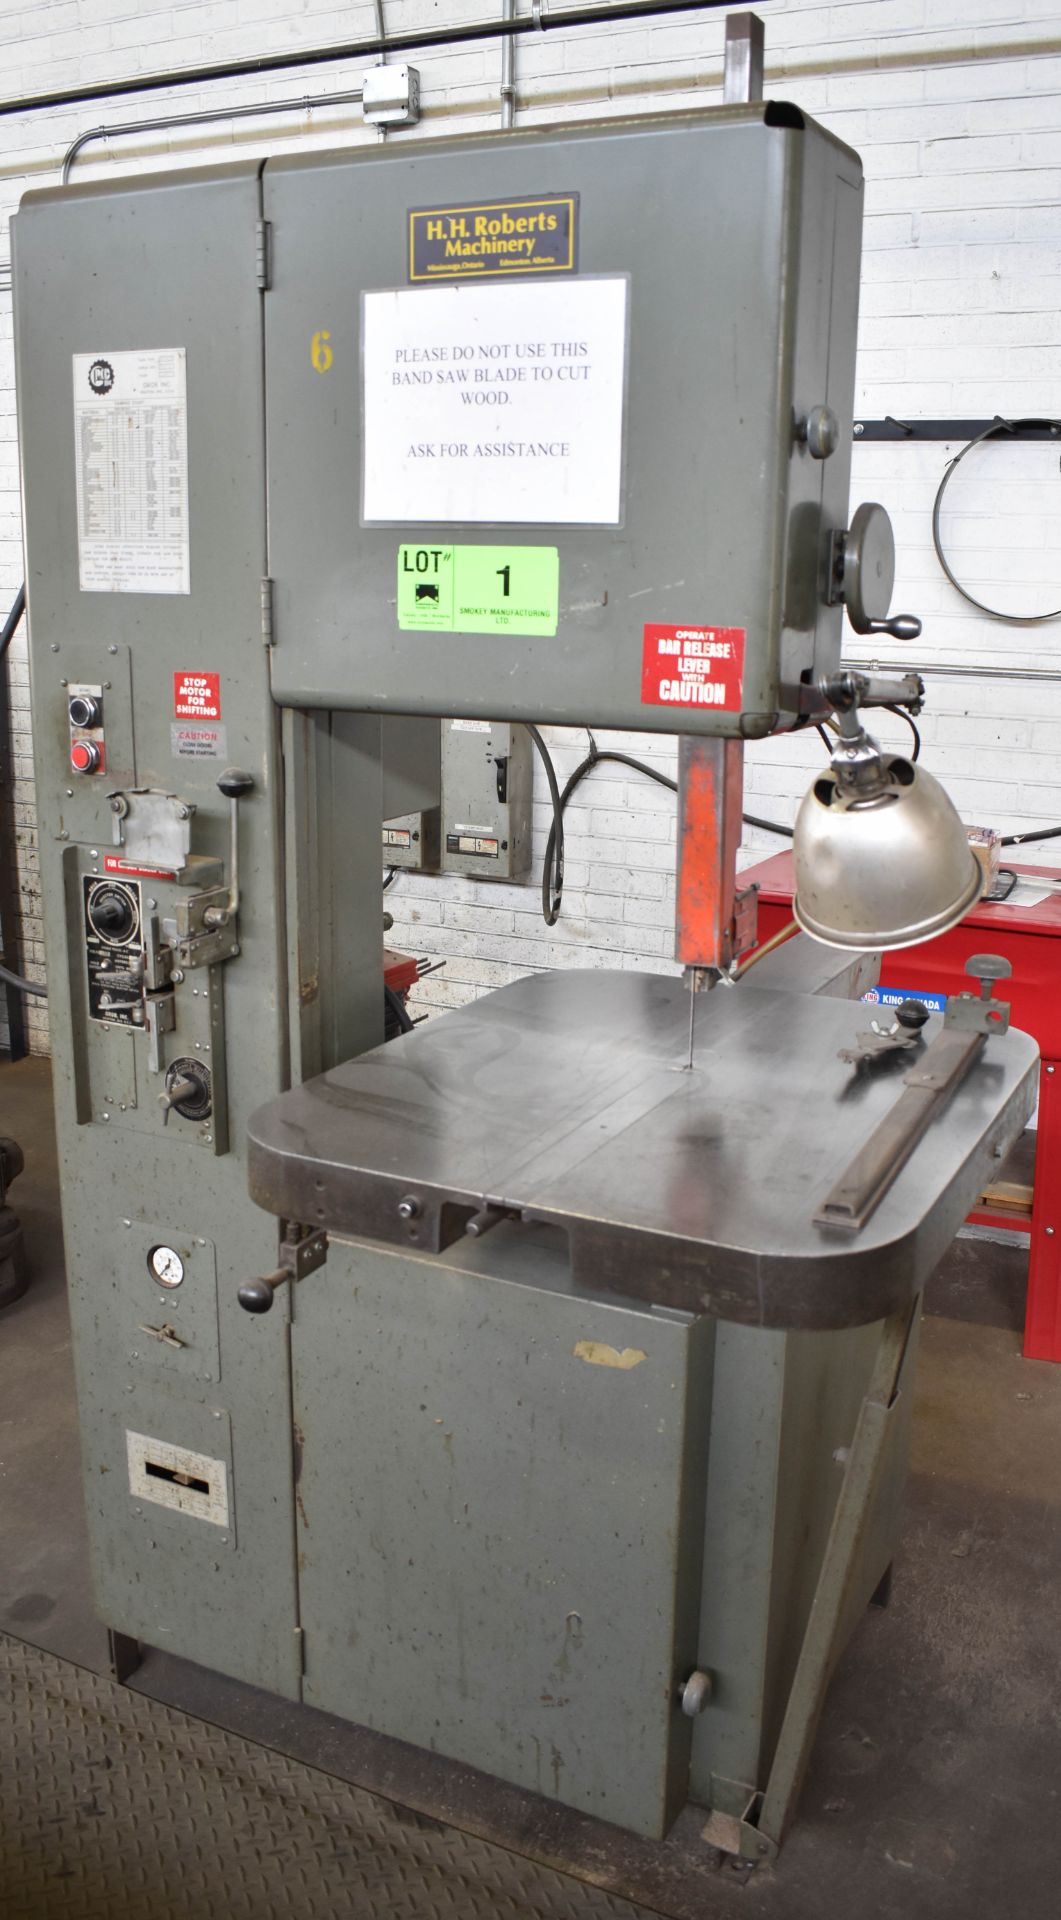 GROB 4V-18 VERTICAL BAND SAW WITH 28"X24" TABLE, 18" THROAT, 10" MAX. WORKPIECE HEIGHT, SPEEDS TO